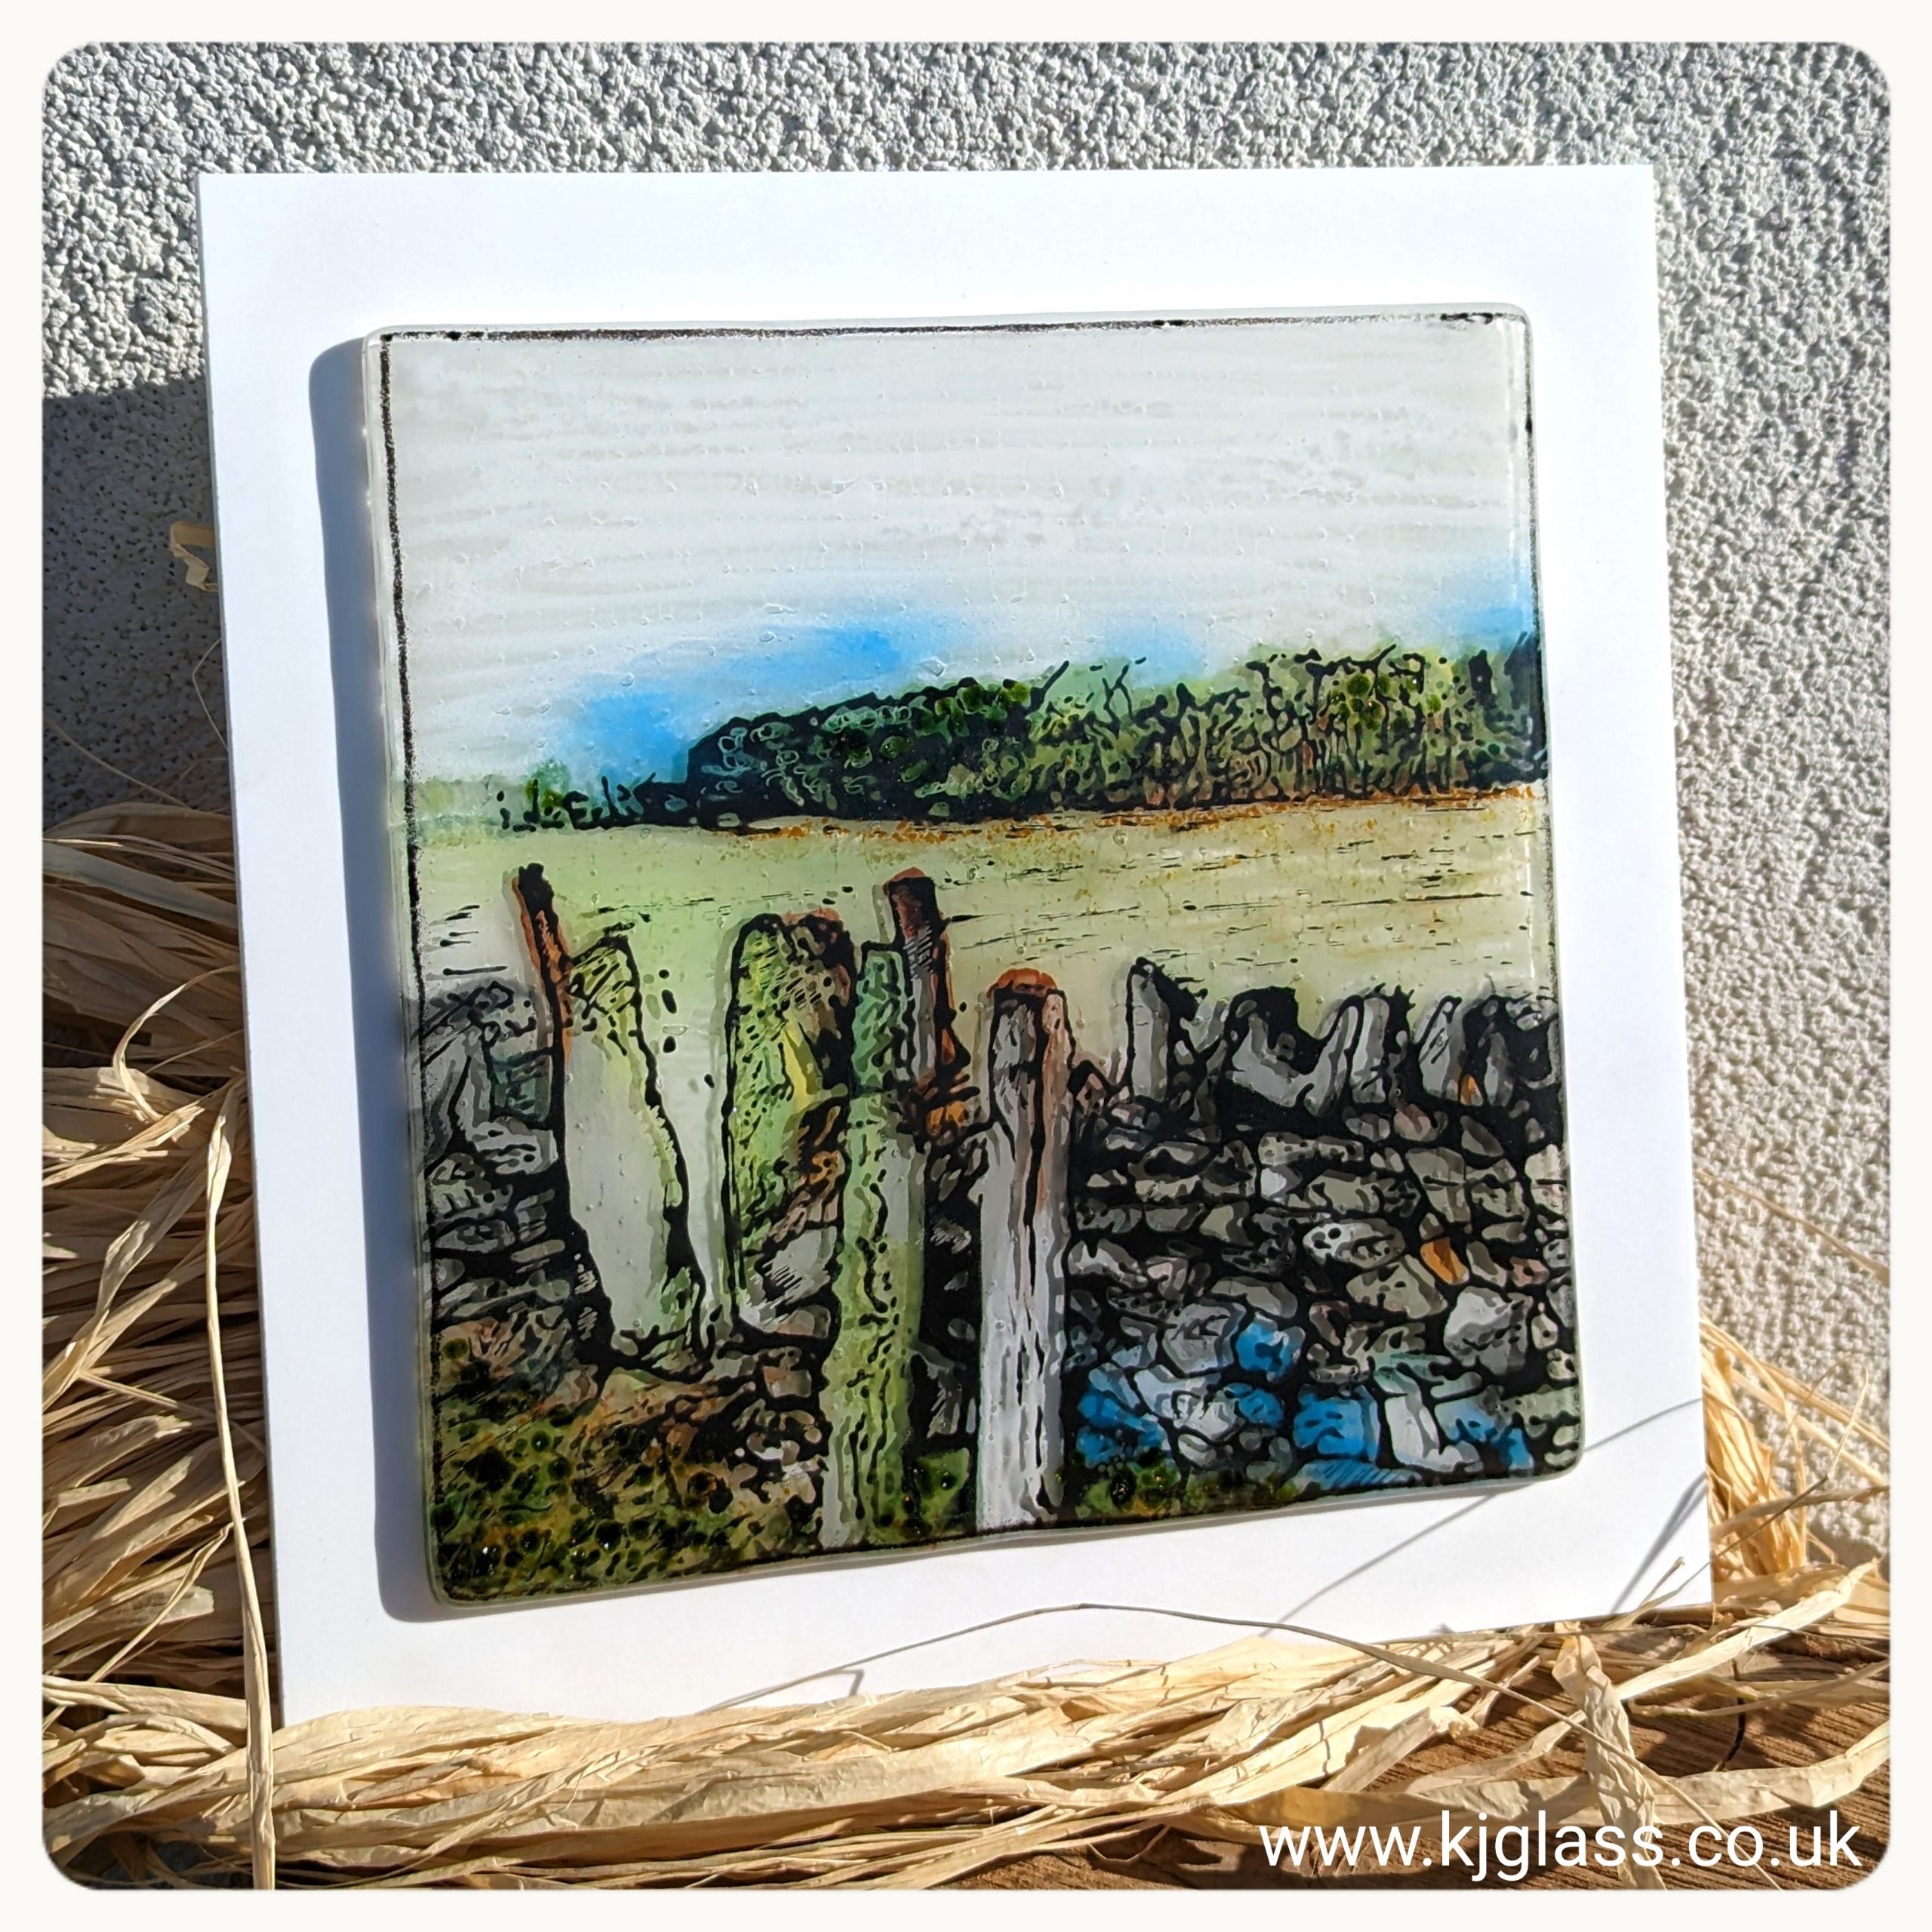 A fabulous art piece depicting a lovely stroll in the countryside. A drystone wall and kissing gate.